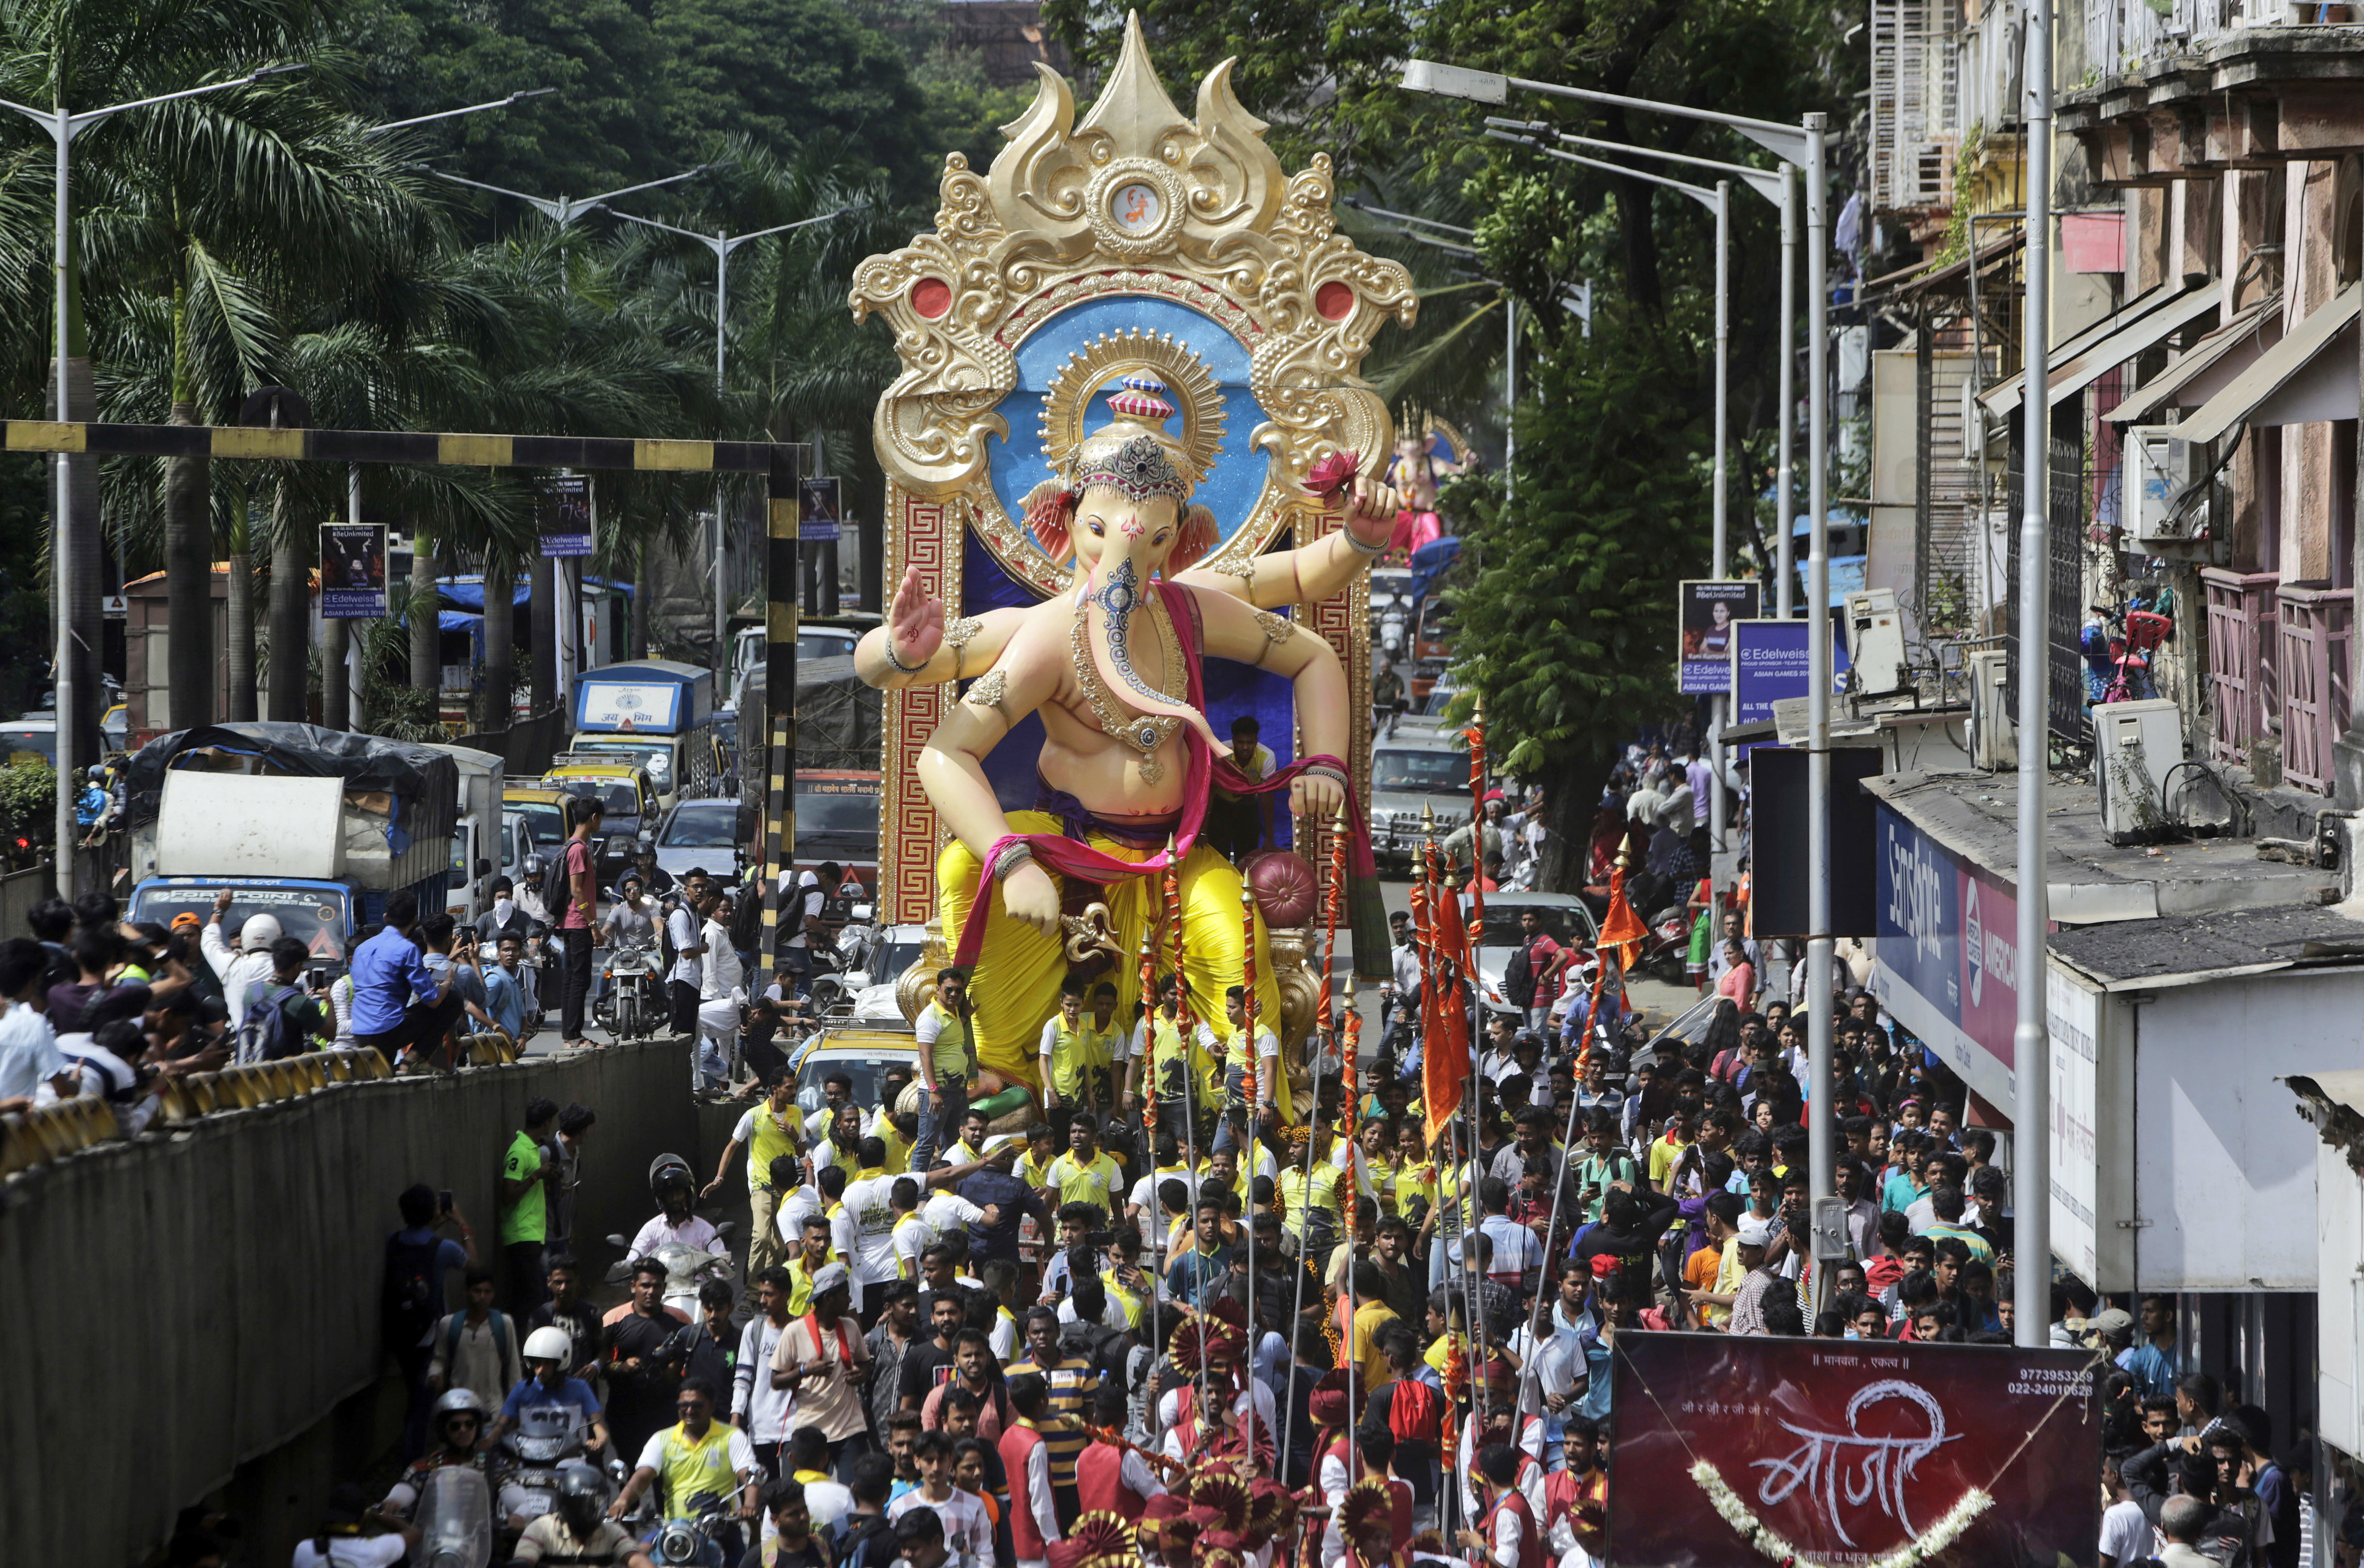 Devotees carry an idol of Hindu god Ganesha from a studio to a temporary place of worship for the upcoming Ganesha Chaturthi festival in Mumbai, India, Saturday, Sept. 1, 2018. Ganesha Chaturthi, the festival celebrating the birth of elephant-headed Ganesha, will begin Sept. 13. (AP Photo/Rajanish Kakade)